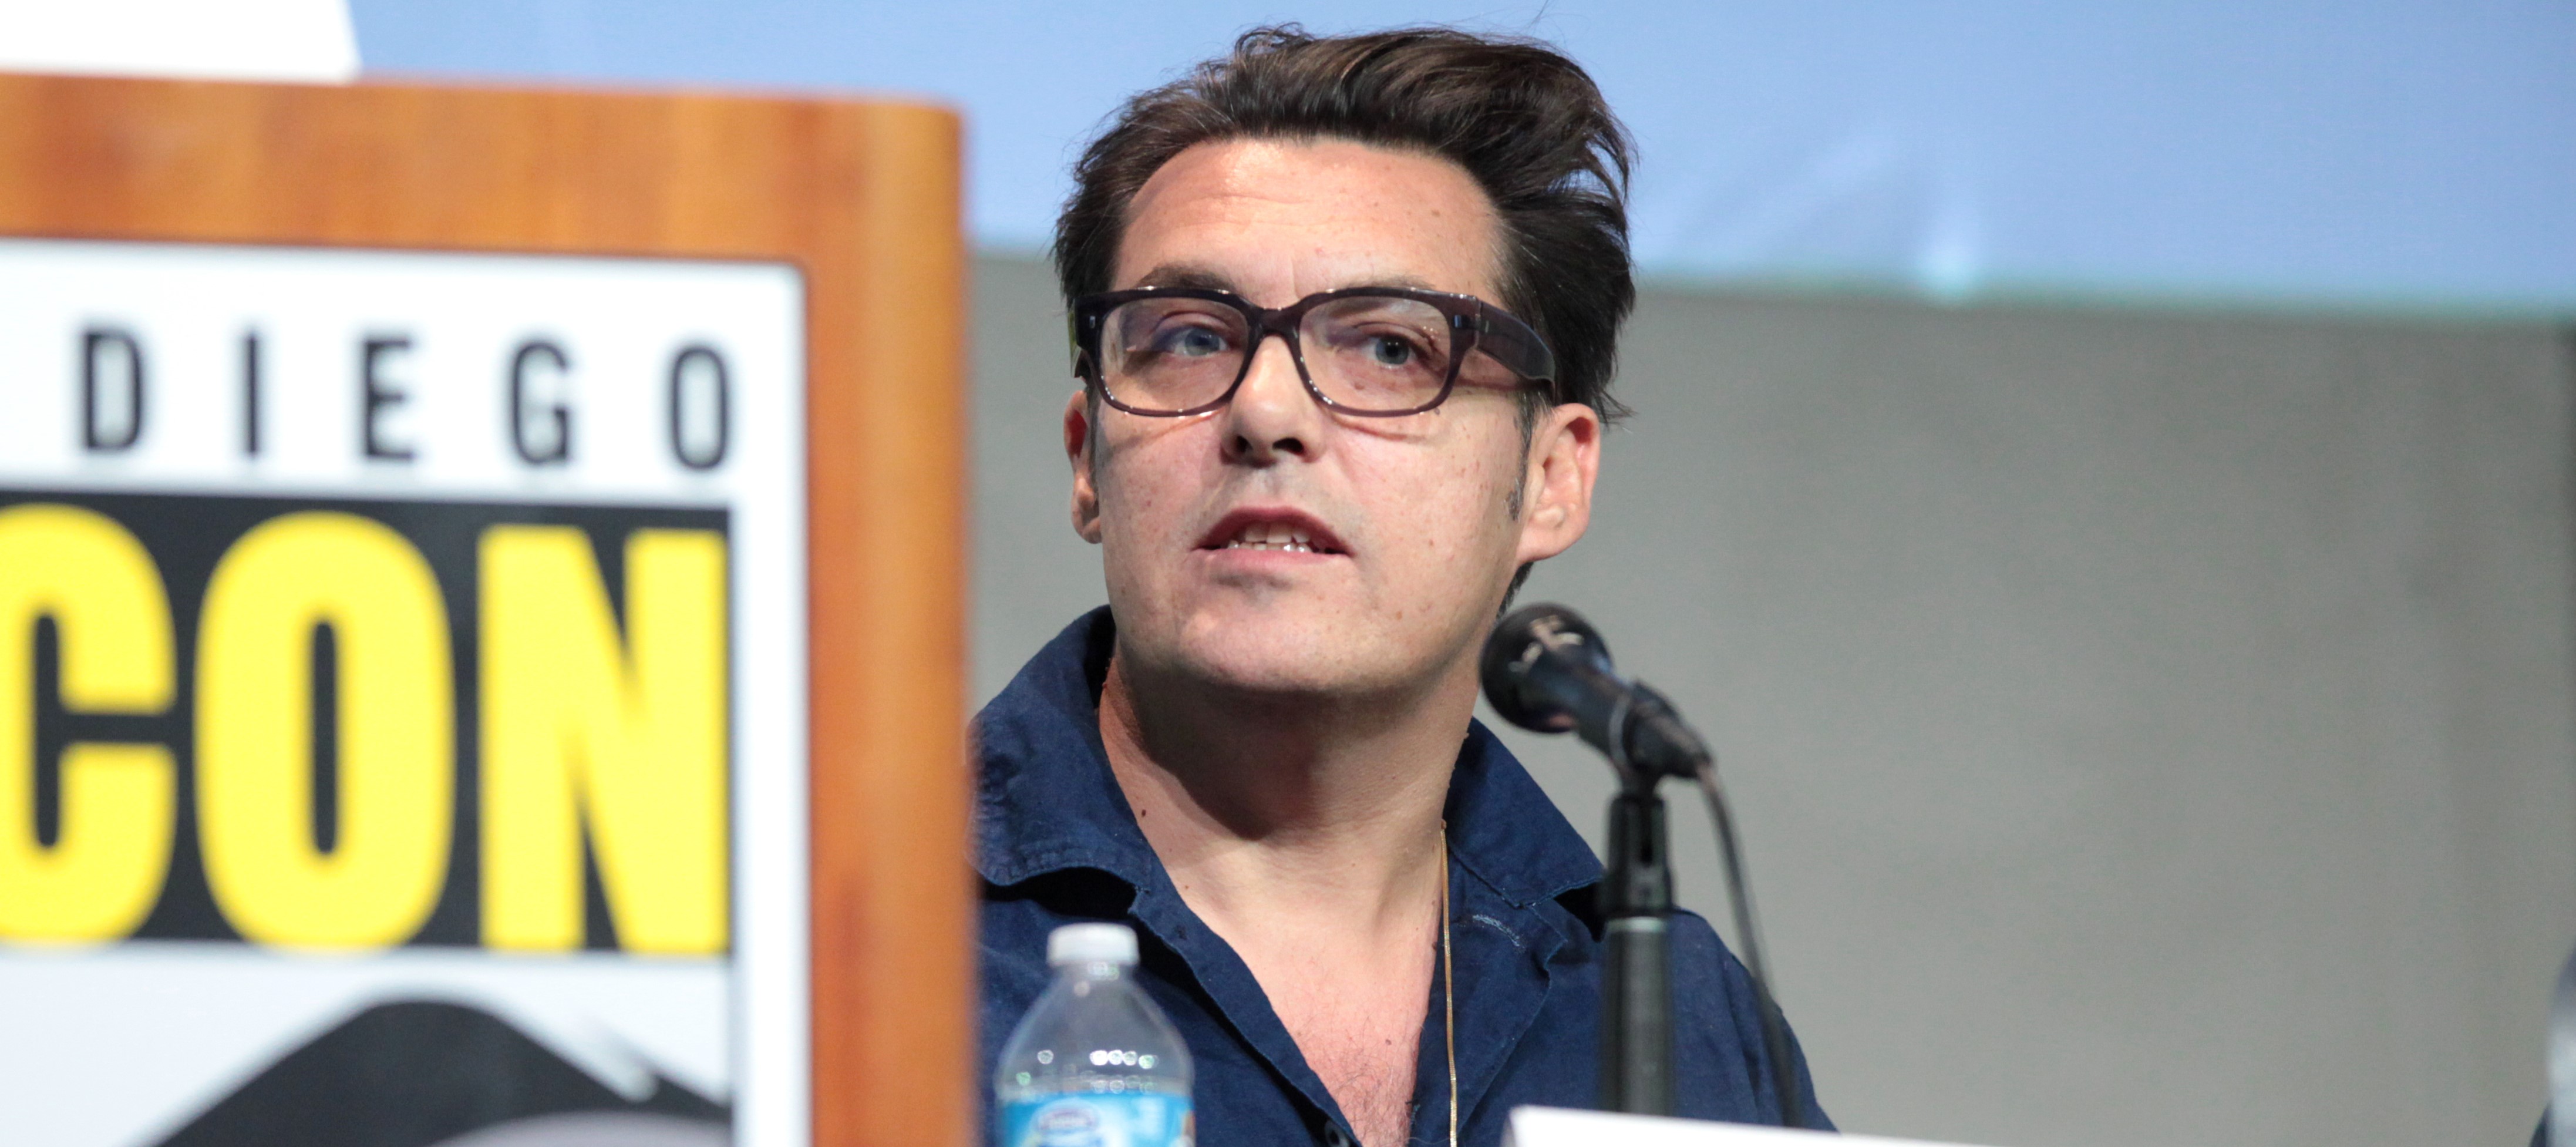 Joe Wright and George Clooney’s The Department Starts Filming in London This Month